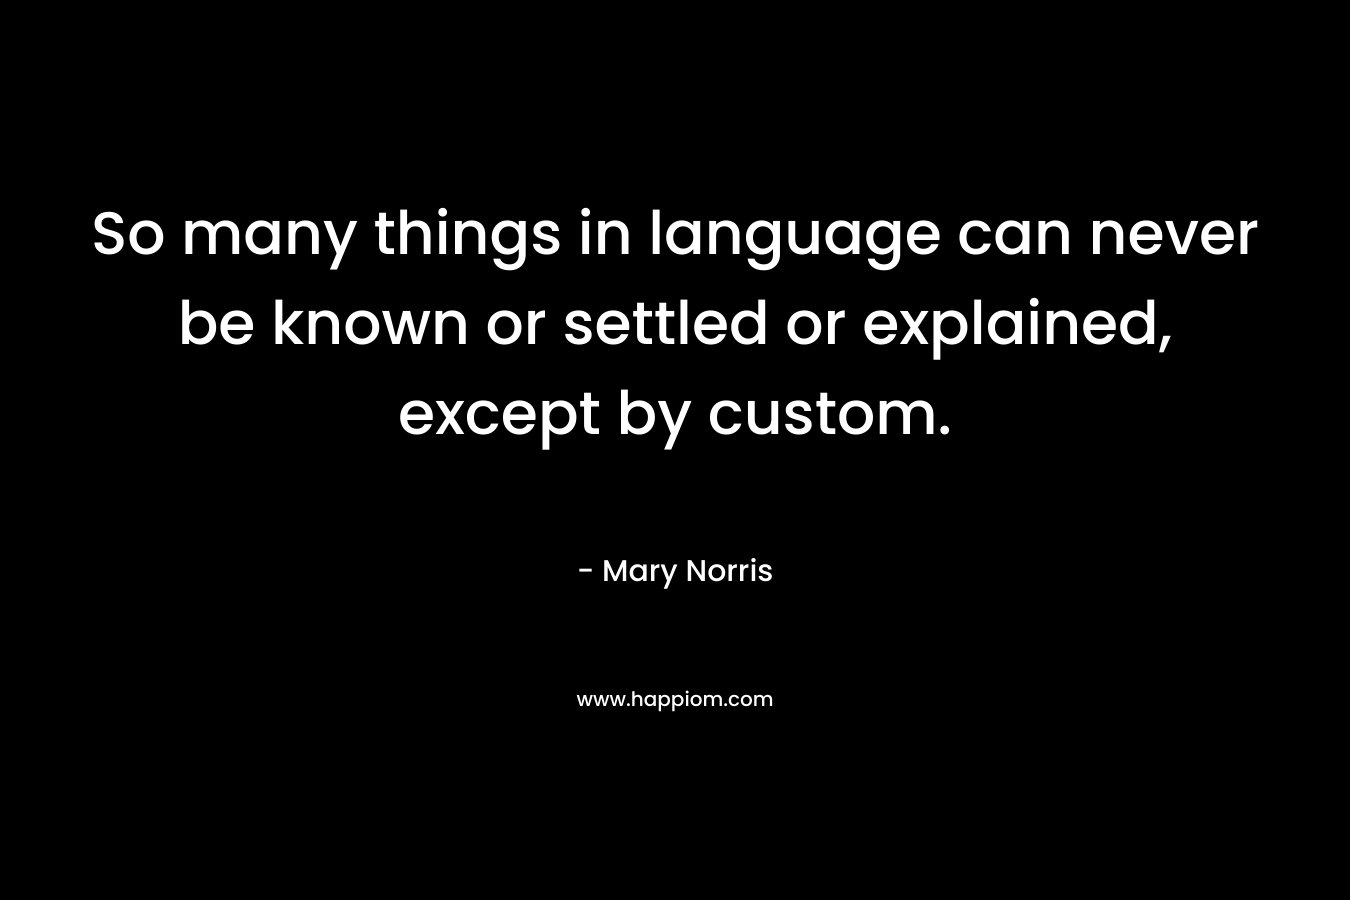 So many things in language can never be known or settled or explained, except by custom. – Mary Norris